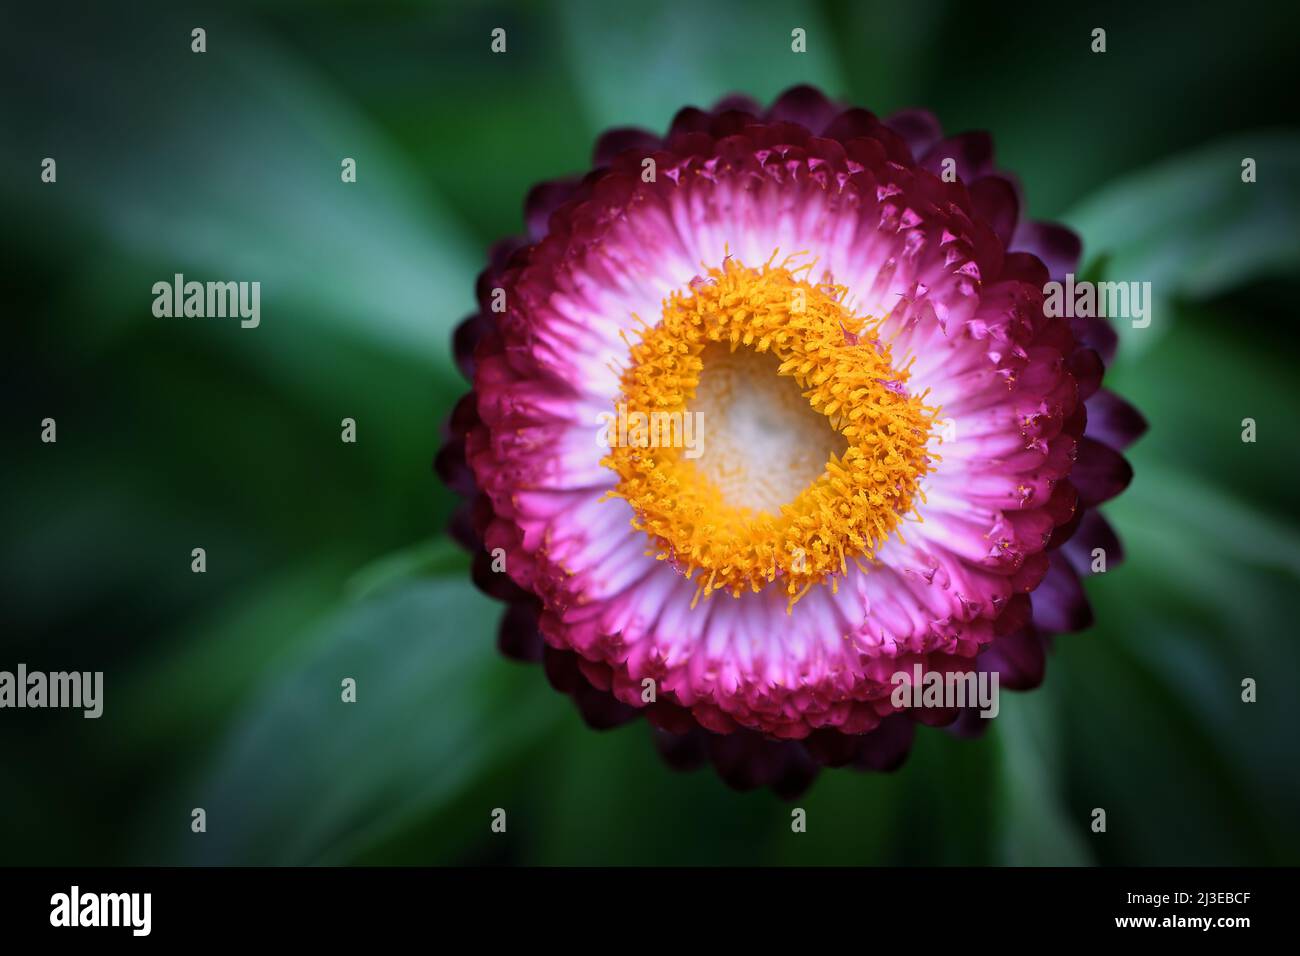 A close up of a violet and yellow Bracteantha -Bracteantha xerochrysum- flower in soft, dark green mood lighting; captured in a Studio Stock Photo